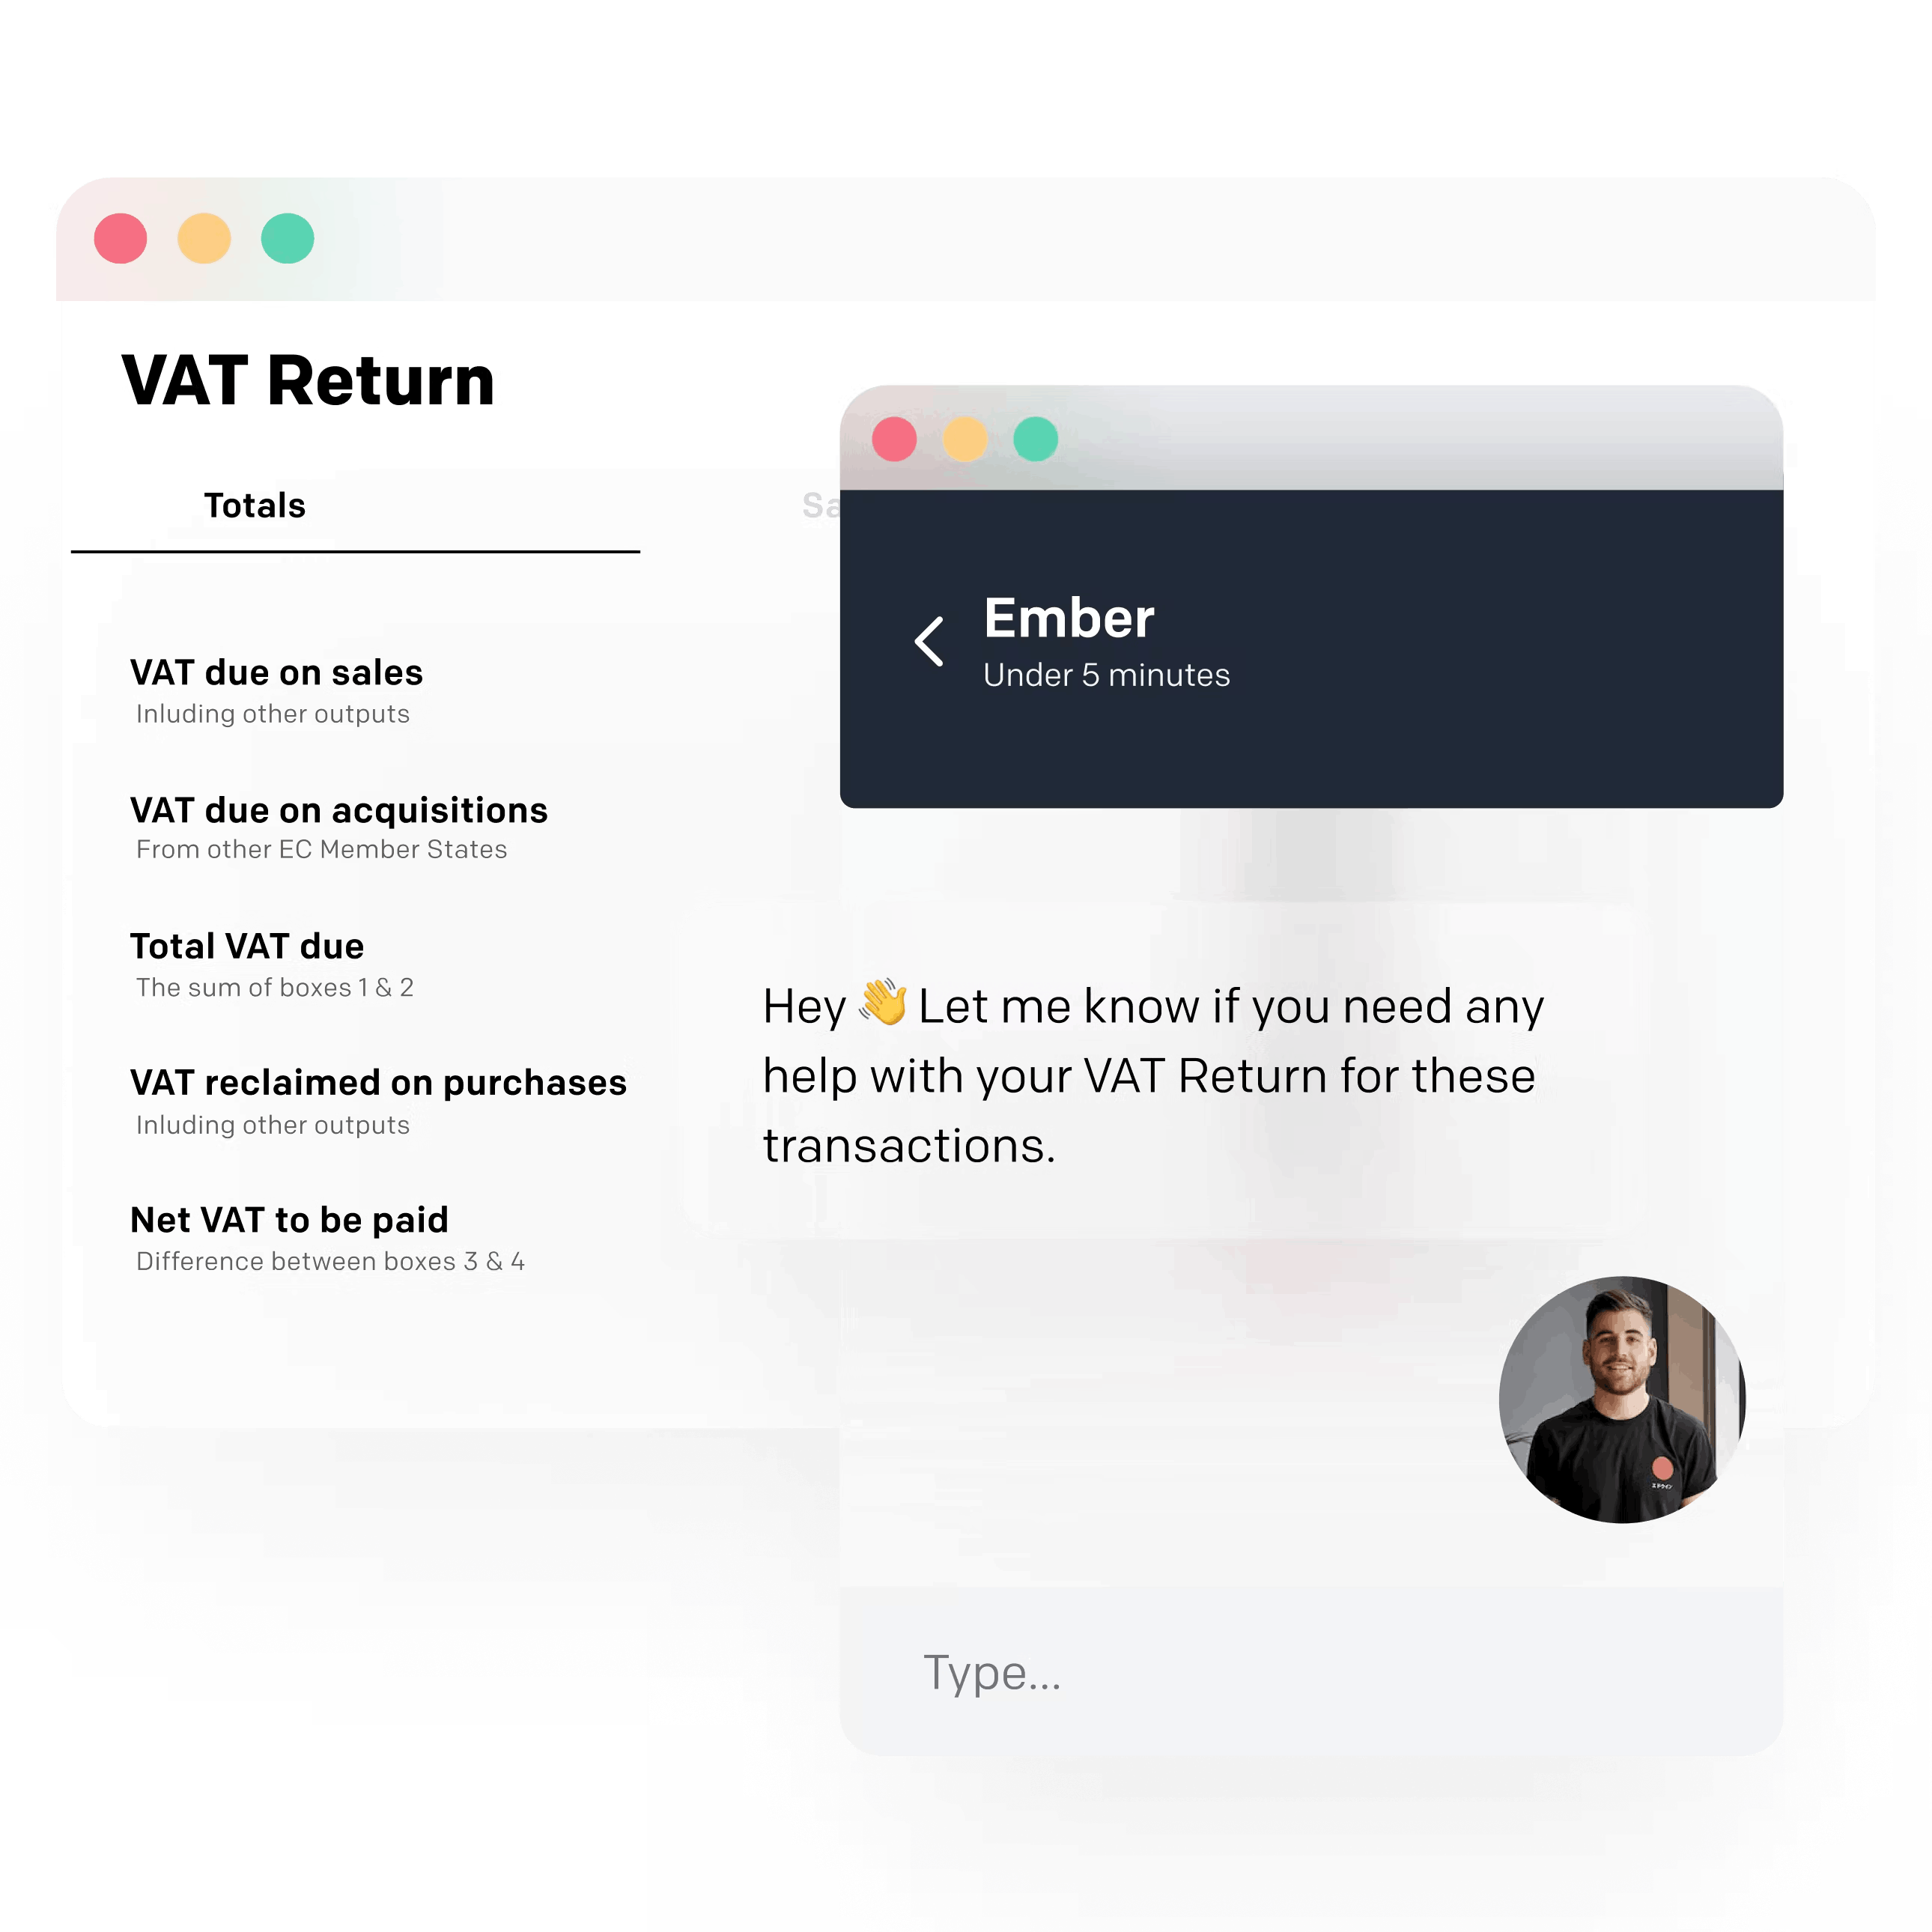 Support message from co-founder Dan in Ember chat box